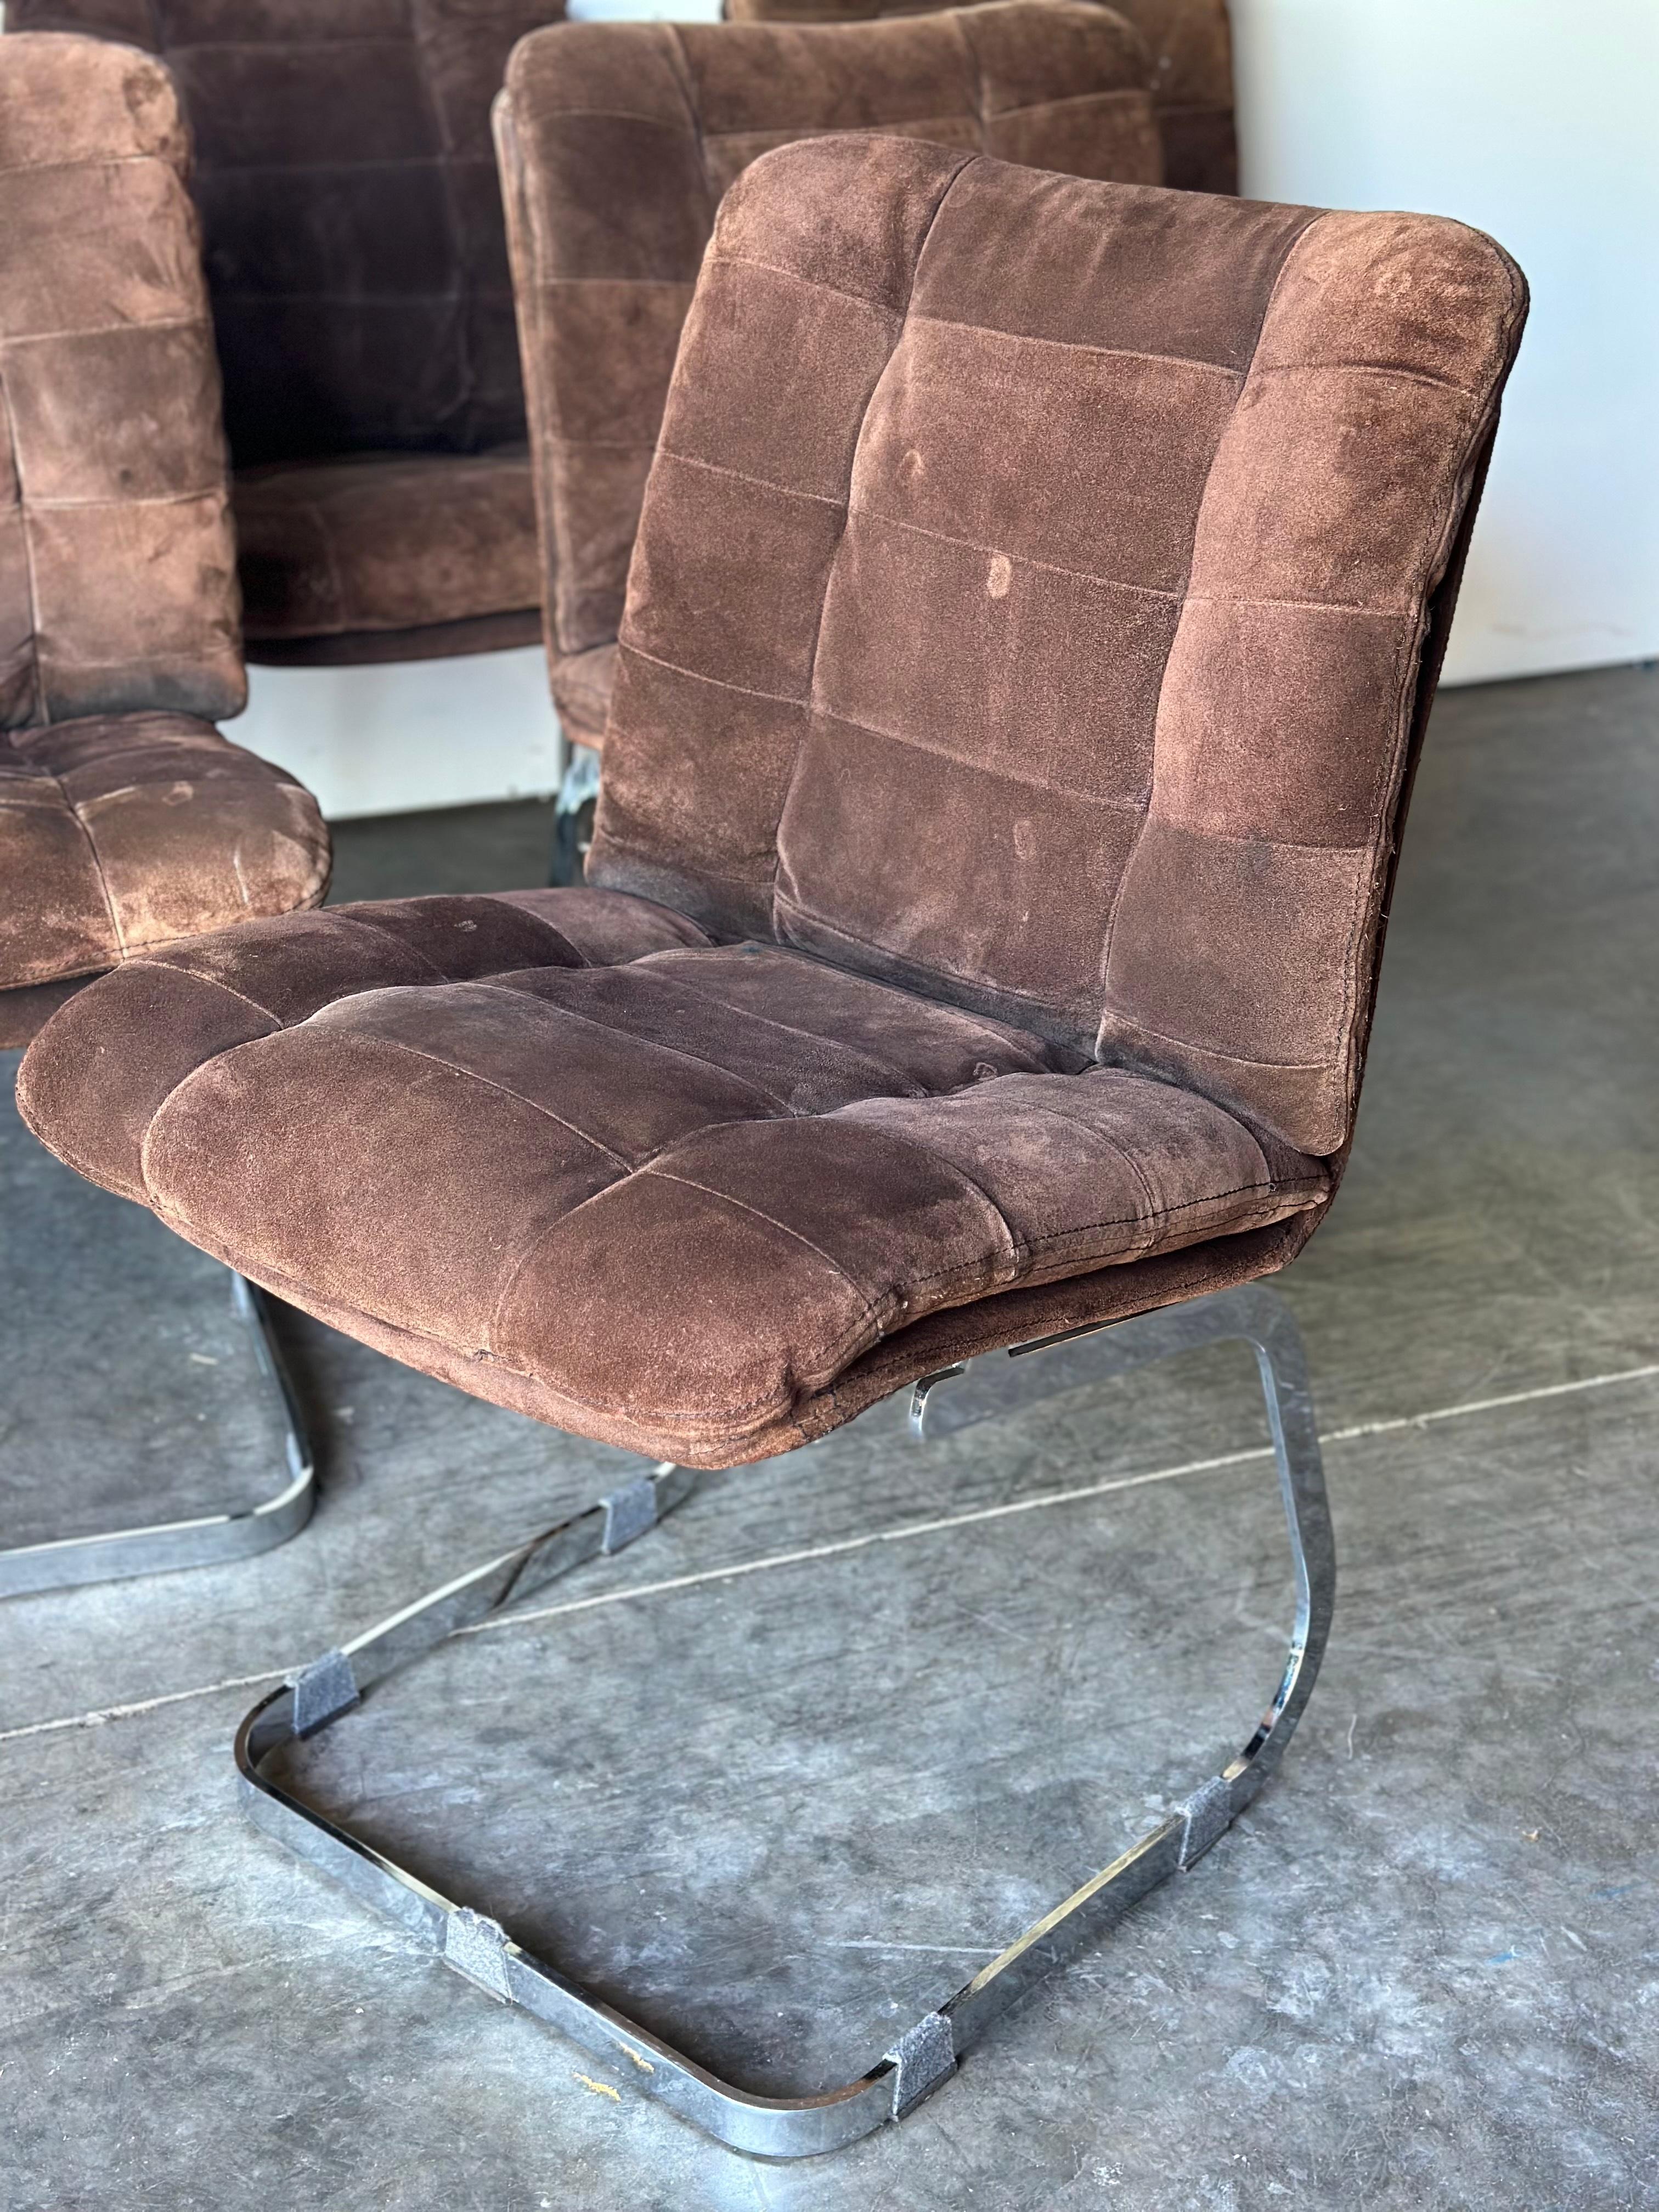 Set of 6 chairs by Roche Bobois. Perfect for dining but could be used in any setting such as an office or studio. These chairs have the ability to blend seamlessly with a variety of styles and are sure to make a statement. The original sueded